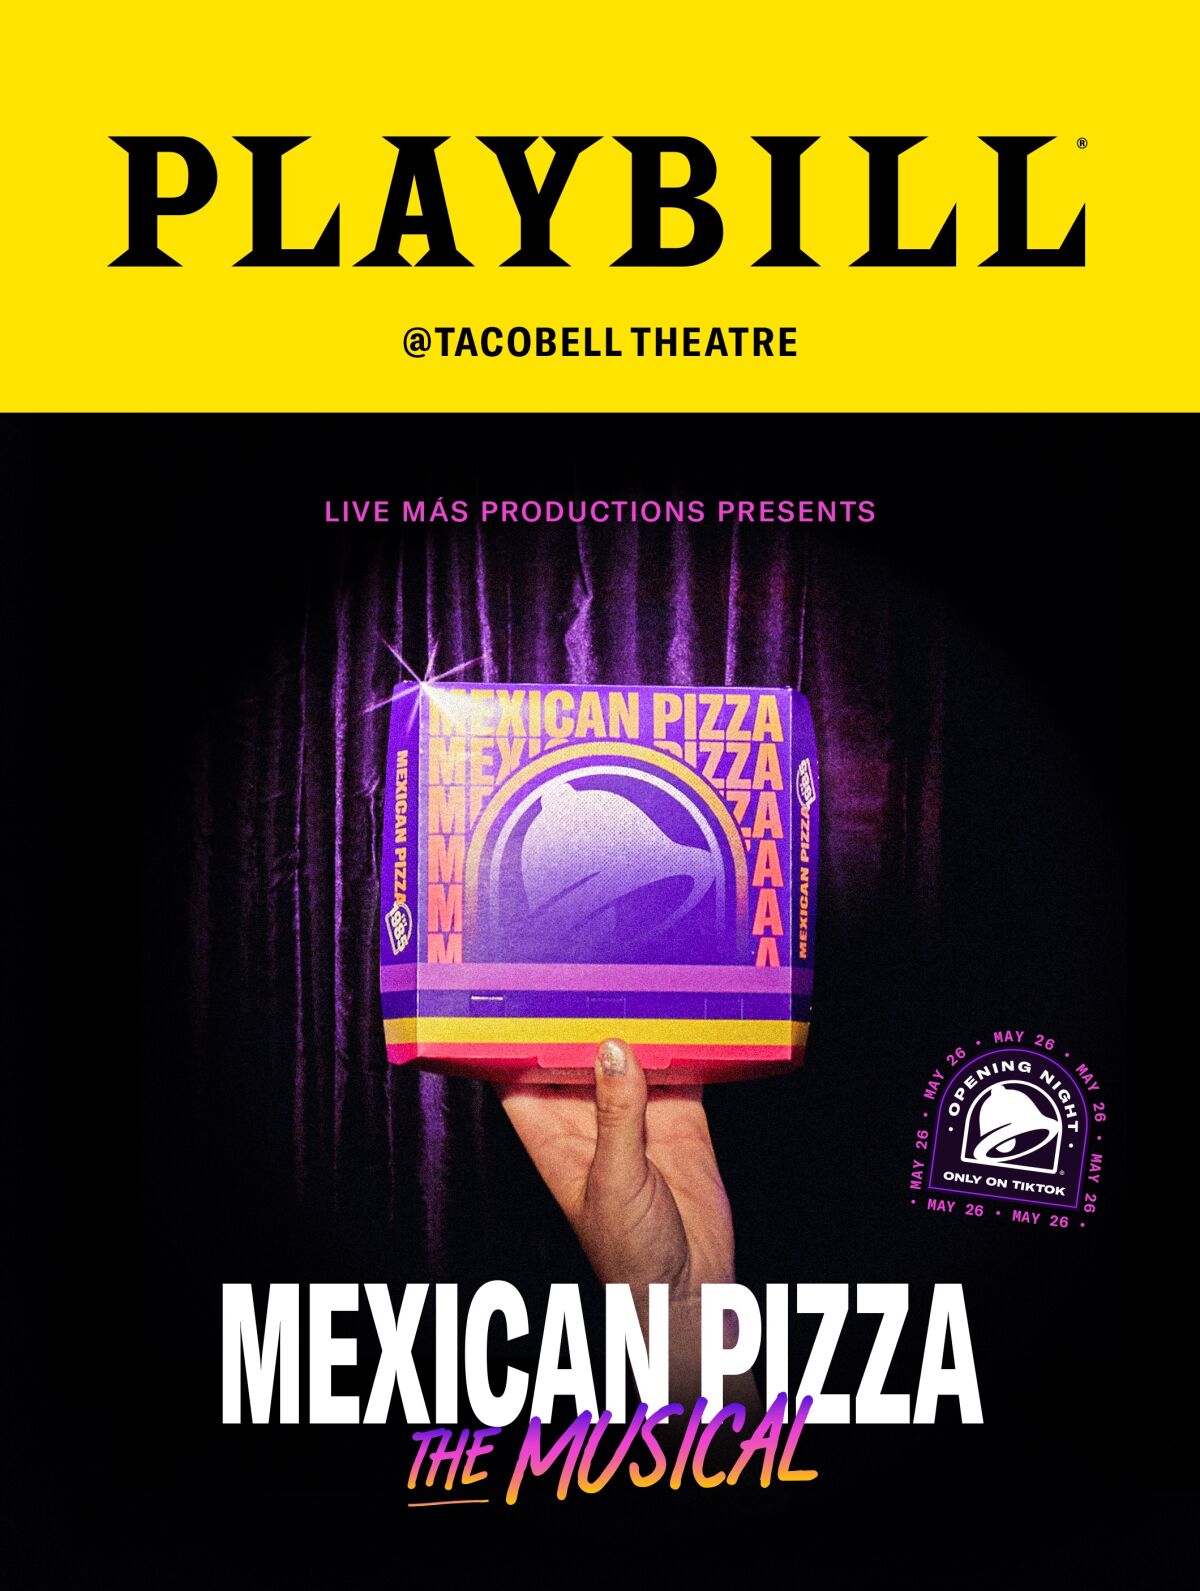 A faux Playbill picturing a hand holding a Mexican Pizza box